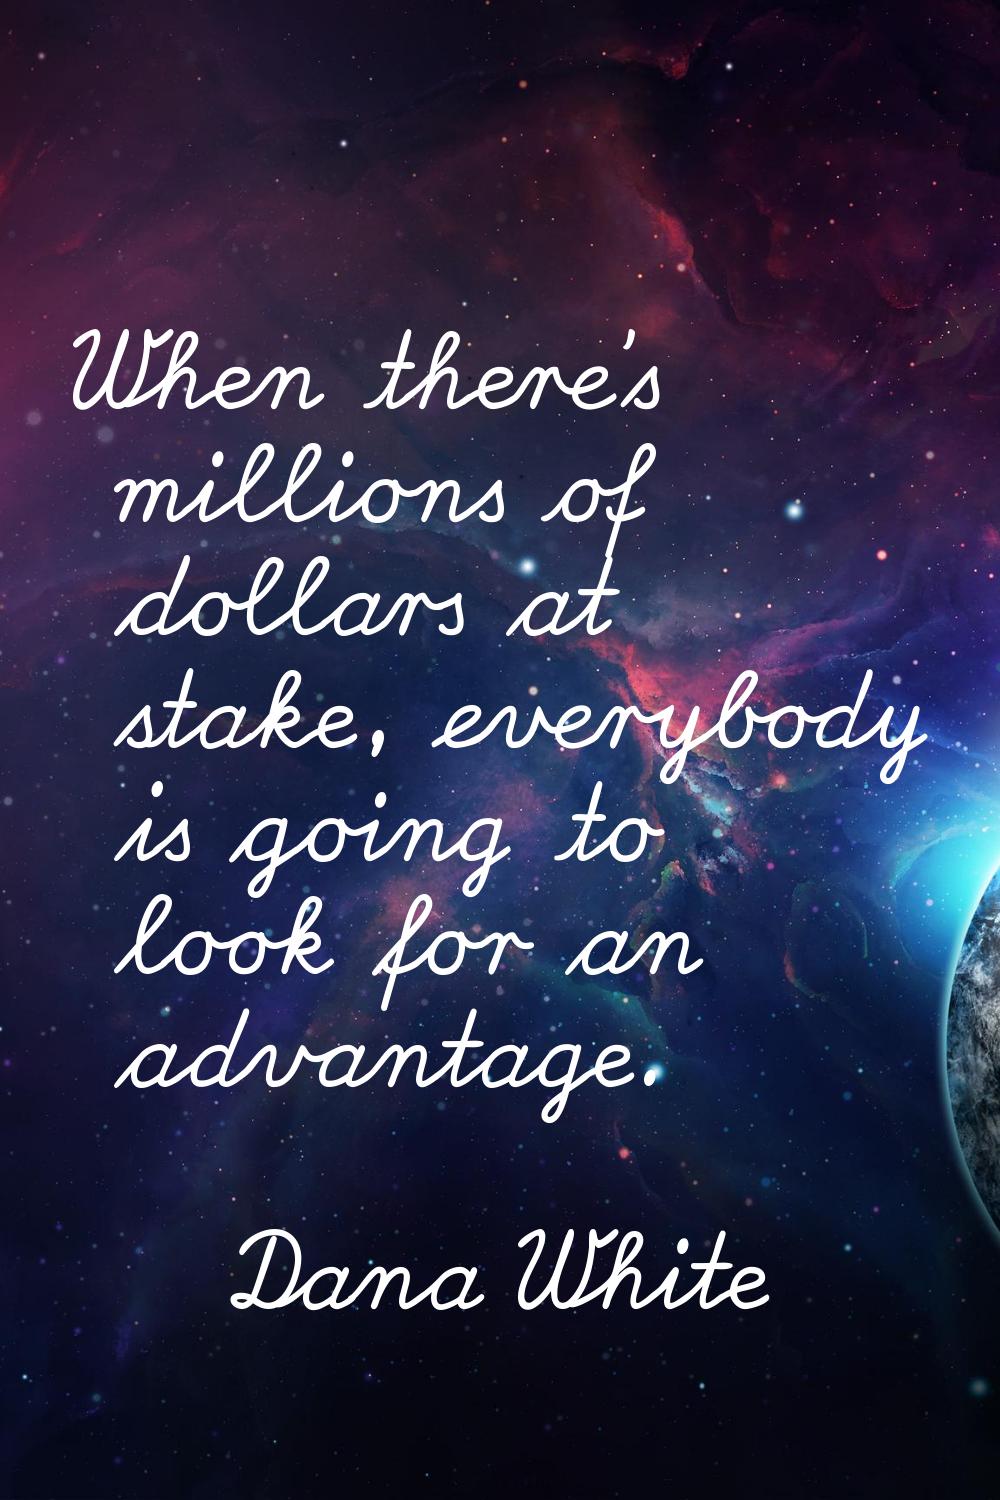 When there's millions of dollars at stake, everybody is going to look for an advantage.